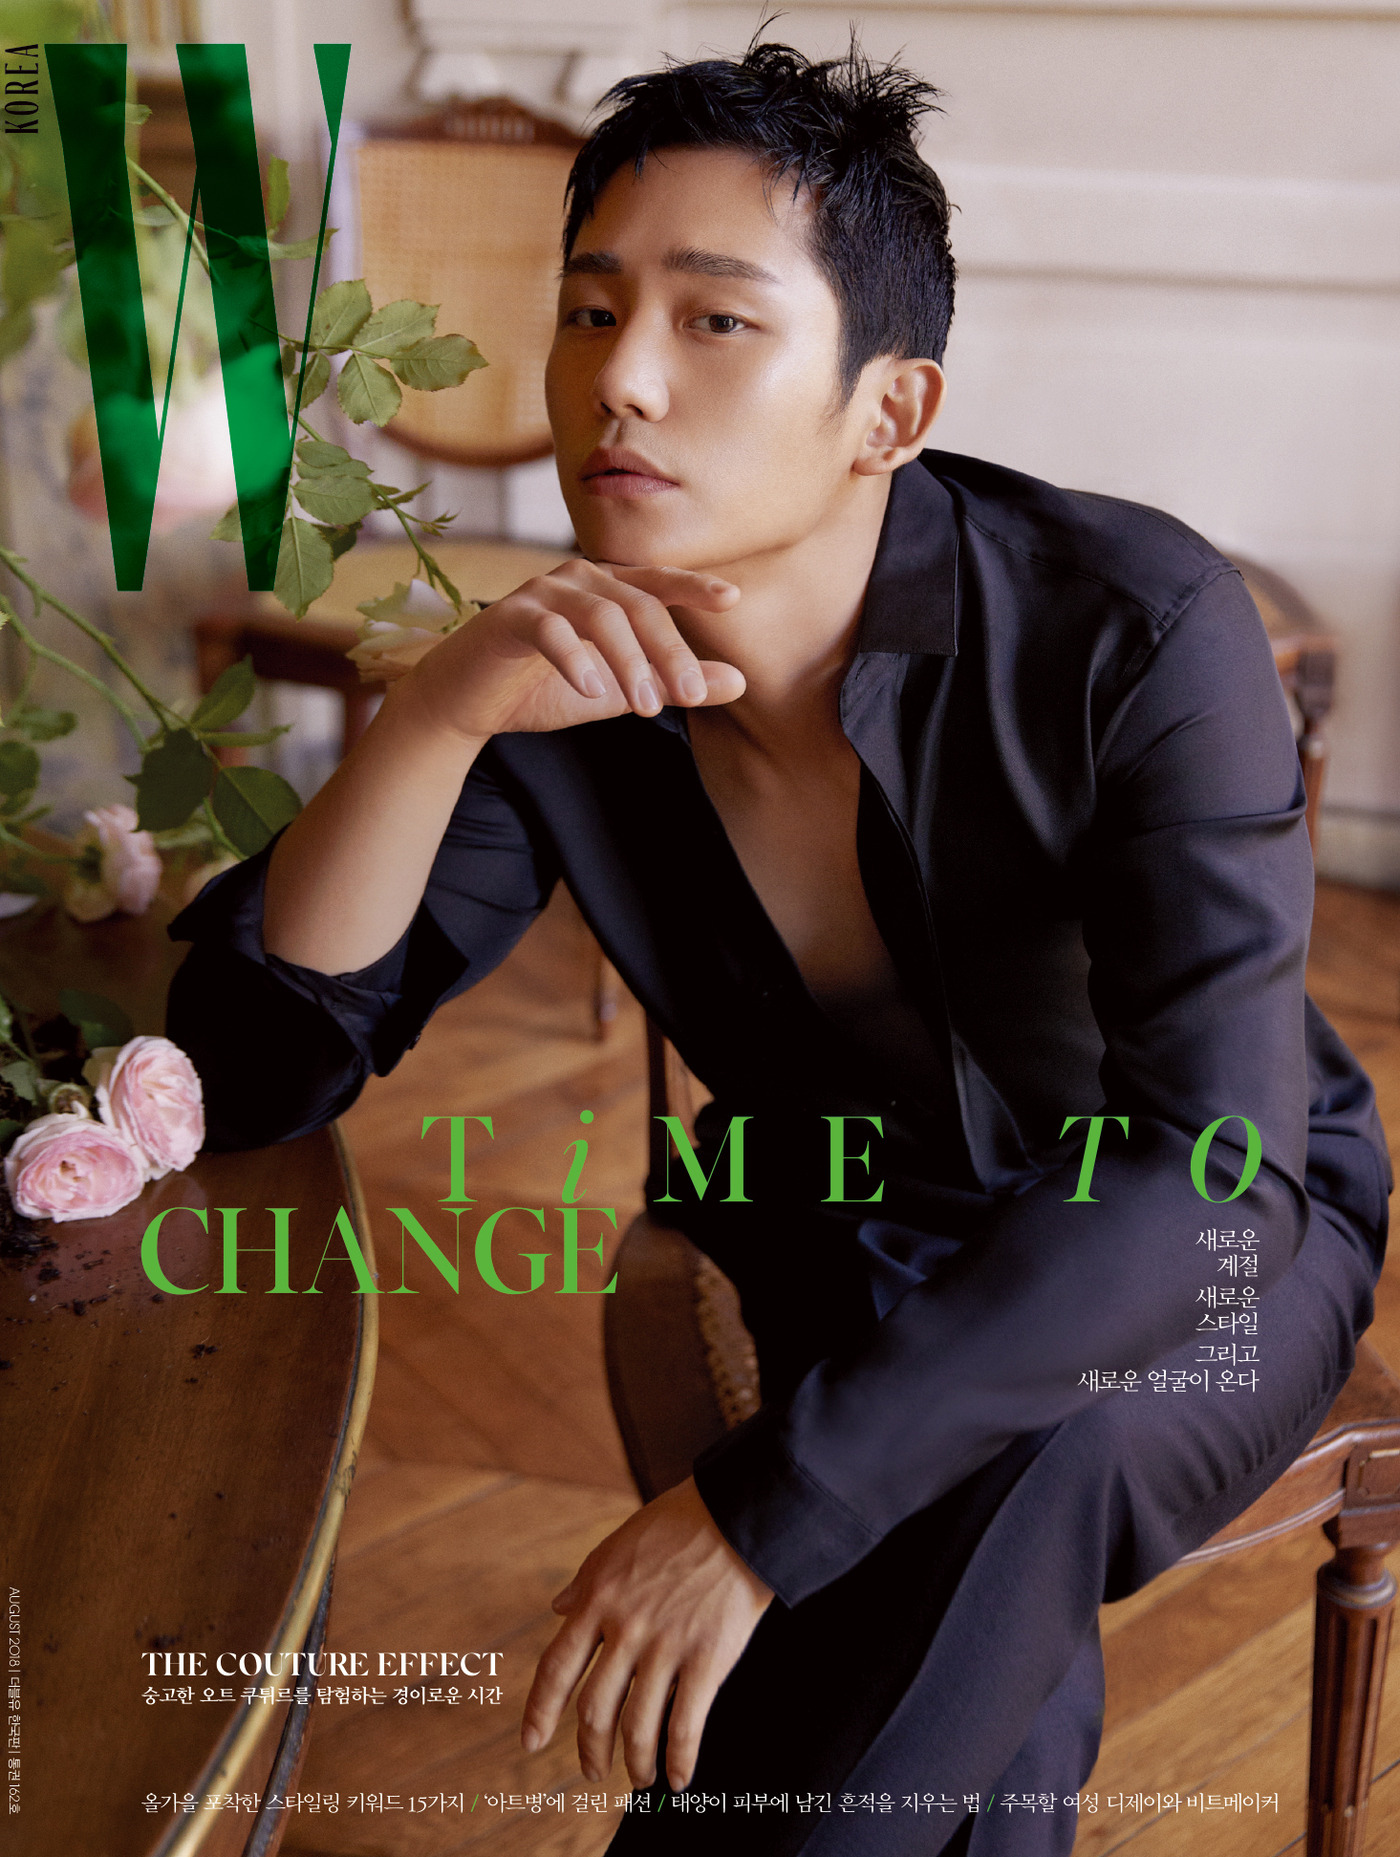 Seoul = = Actor Jung Hae In has covered the cover of the August issue of the fashion magazine W.Jung Hae In, who was busy with the drama The Man Who Buys Good Bob and overseas fan meeting, recently filmed a picture that expresses his unique charm in Paris, France, where he visited the Dior Man collection, which he expected for Kim Jones first debut.In particular, the two versions of the cover have become a hot topic with various aspects ranging from Jung Hae Ins boyhood to male beauty.In this picture, Jung Hae In captivates his gaze with his fascinating eyes and unique atmosphere.He has developed a different concept that has never been shown before, from charisma to dreamy expression that overwhelms the atmosphere.In addition, Jung Hae In, who stares at the camera indifferently, even mature sexy is buried.On this day, Jung Hae In showed a professional aspect by expressing delicate emotions despite the concept of challenging for the first time.He received praise from the staff for his excellent fashion digestion ability, from pose and expression to the concept, casual to suit.Jung Hae In said, Life and acting are inseparable, and life is also an actor in life, and life is more important as you work on your work.For example, I try not to live a regular life well. I do not think what I do is a regular personality. In addition to that, Jung Hae In also talked about lifestyles such as lifestyle and hobby, as well as various ways to enjoy his own Cattle turnover (small but definite happiness).On the other hand, Jung Hae Ins cover picture and interview can be seen through the August issue of W Korea sold at major bookstores nationwide from 20th.Jung Hae In will meet with domestic fans for a long time with a fan meeting held at Kyunghee University Peace Hall on the 28th.